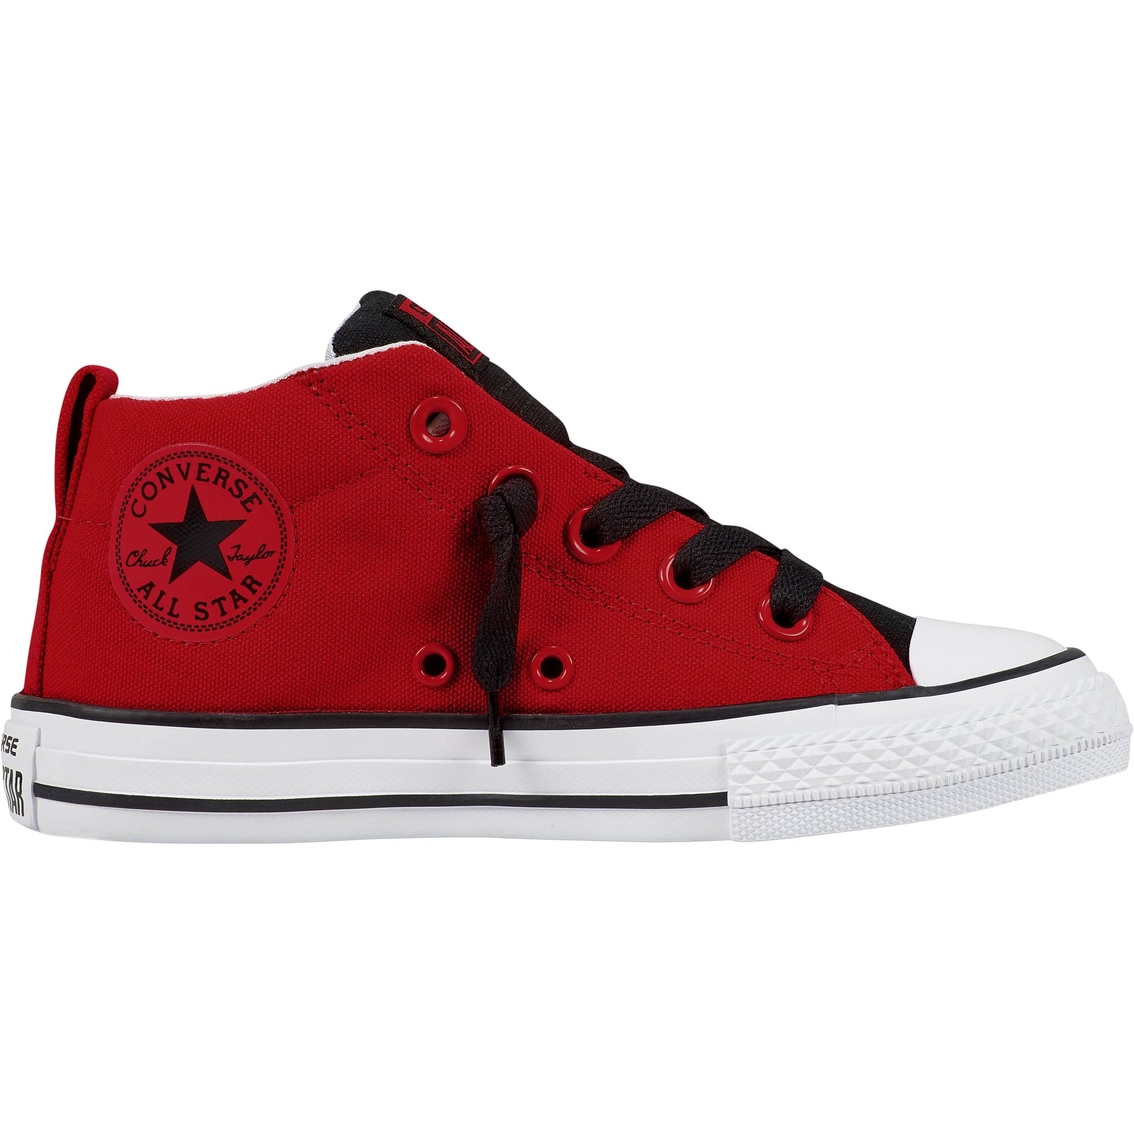 Converse Chuck Taylor All Star Boys Street Mid Shoes | Sneakers | Shoes ...